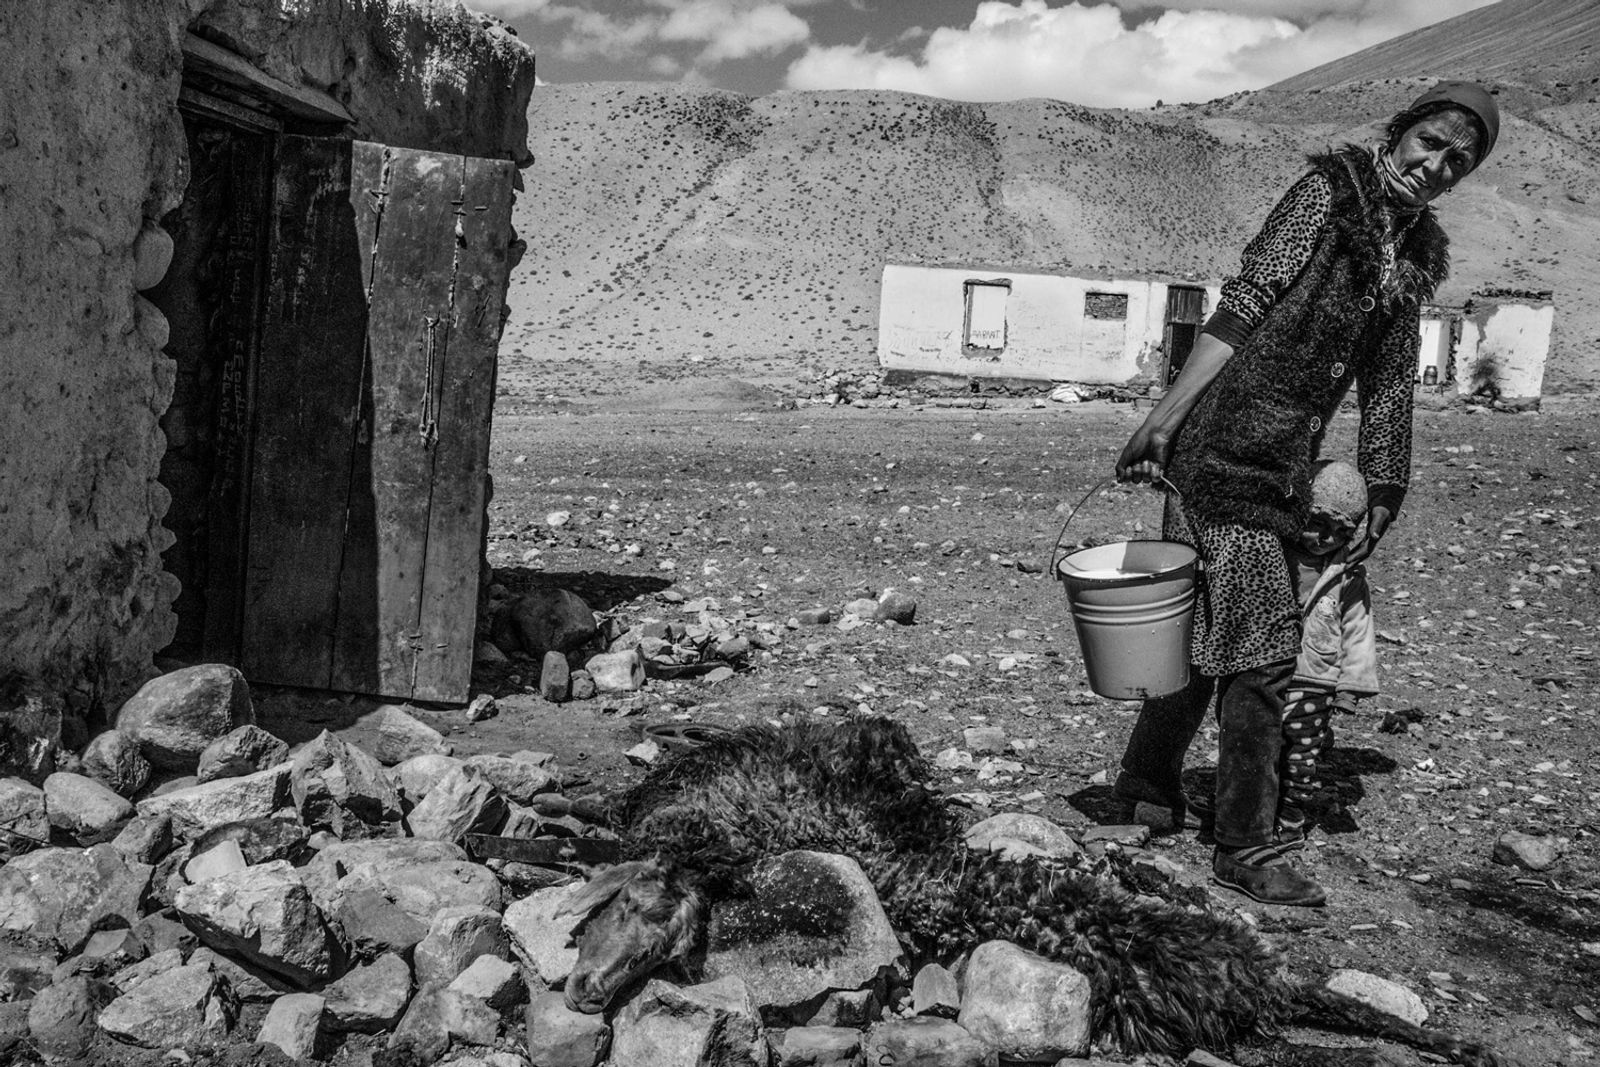 © David Trattles - Image from the Tajikistan Kefir + First Bicycle Ride photography project